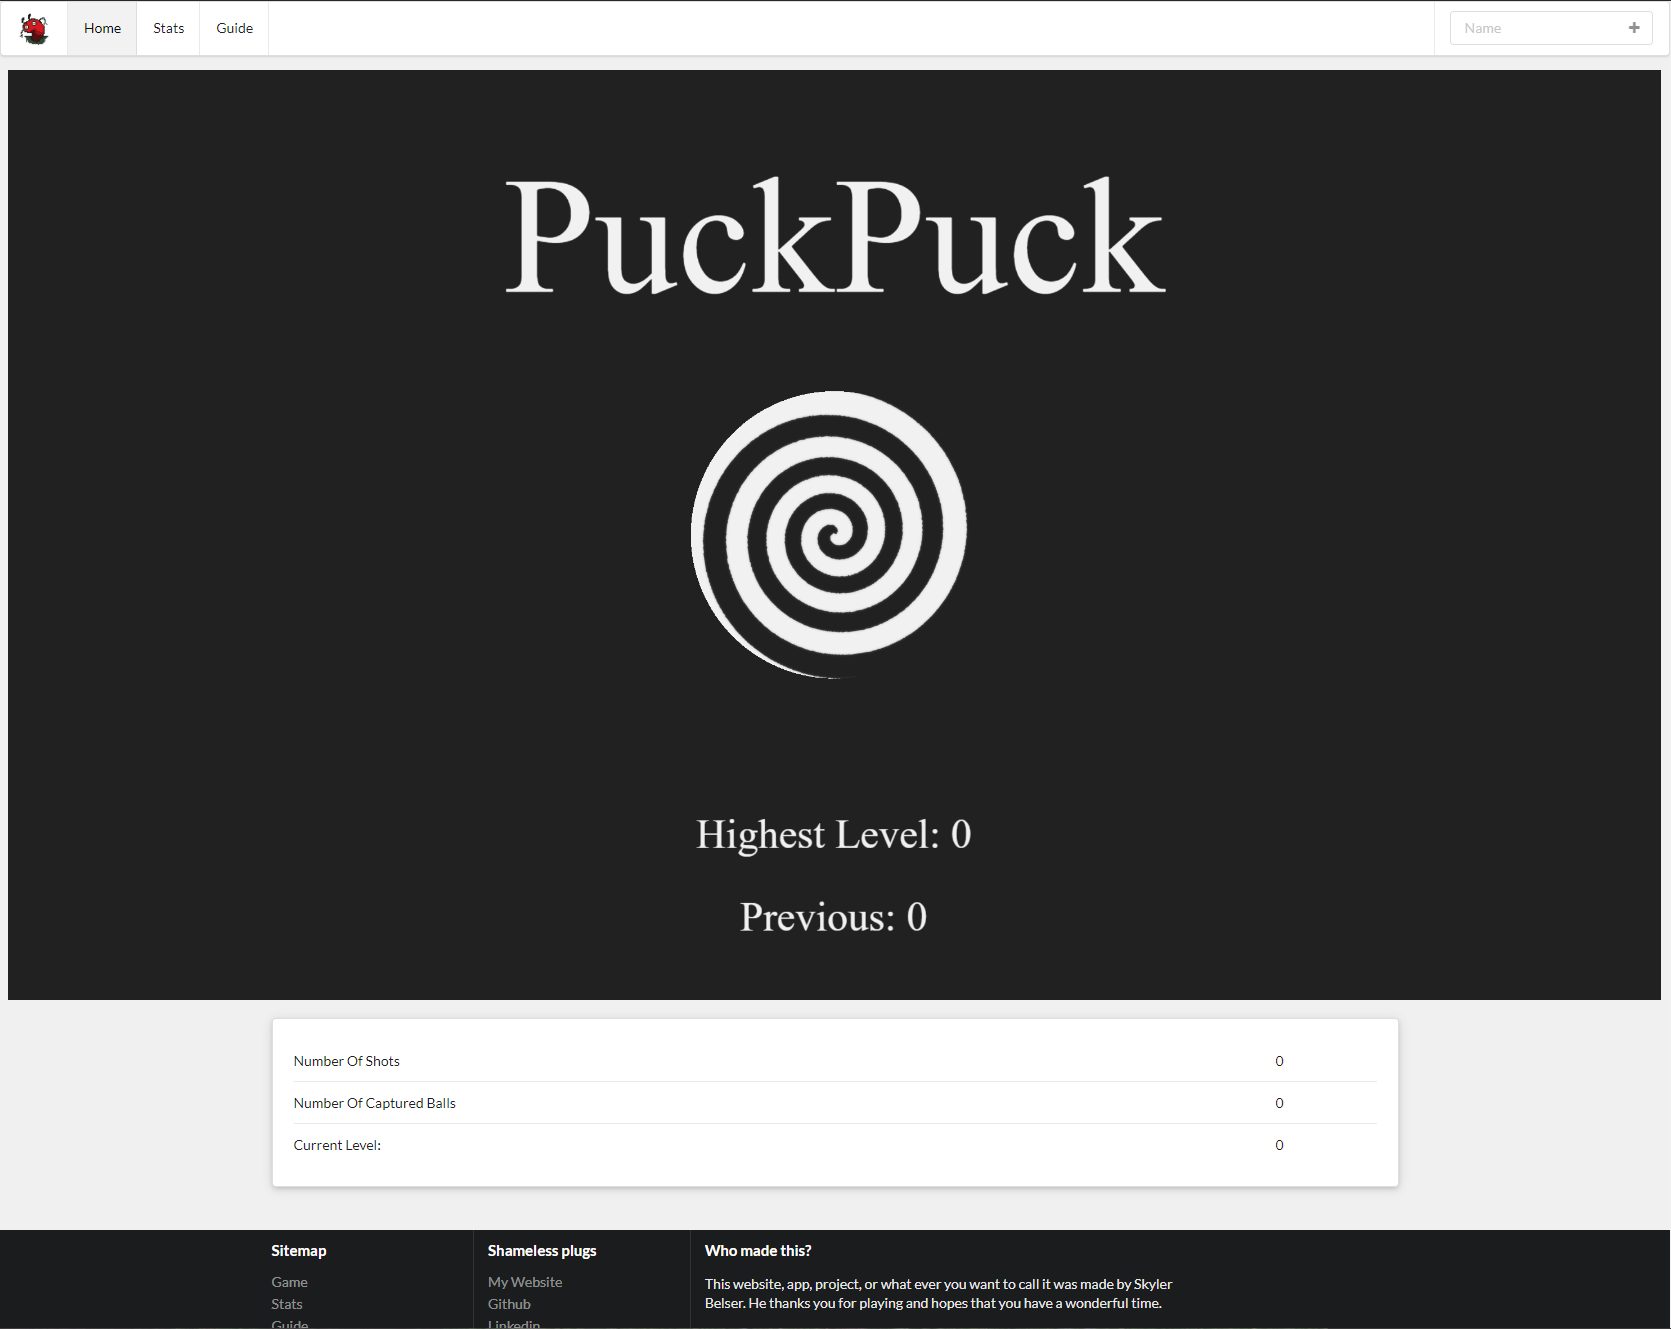 PuckPuck front page